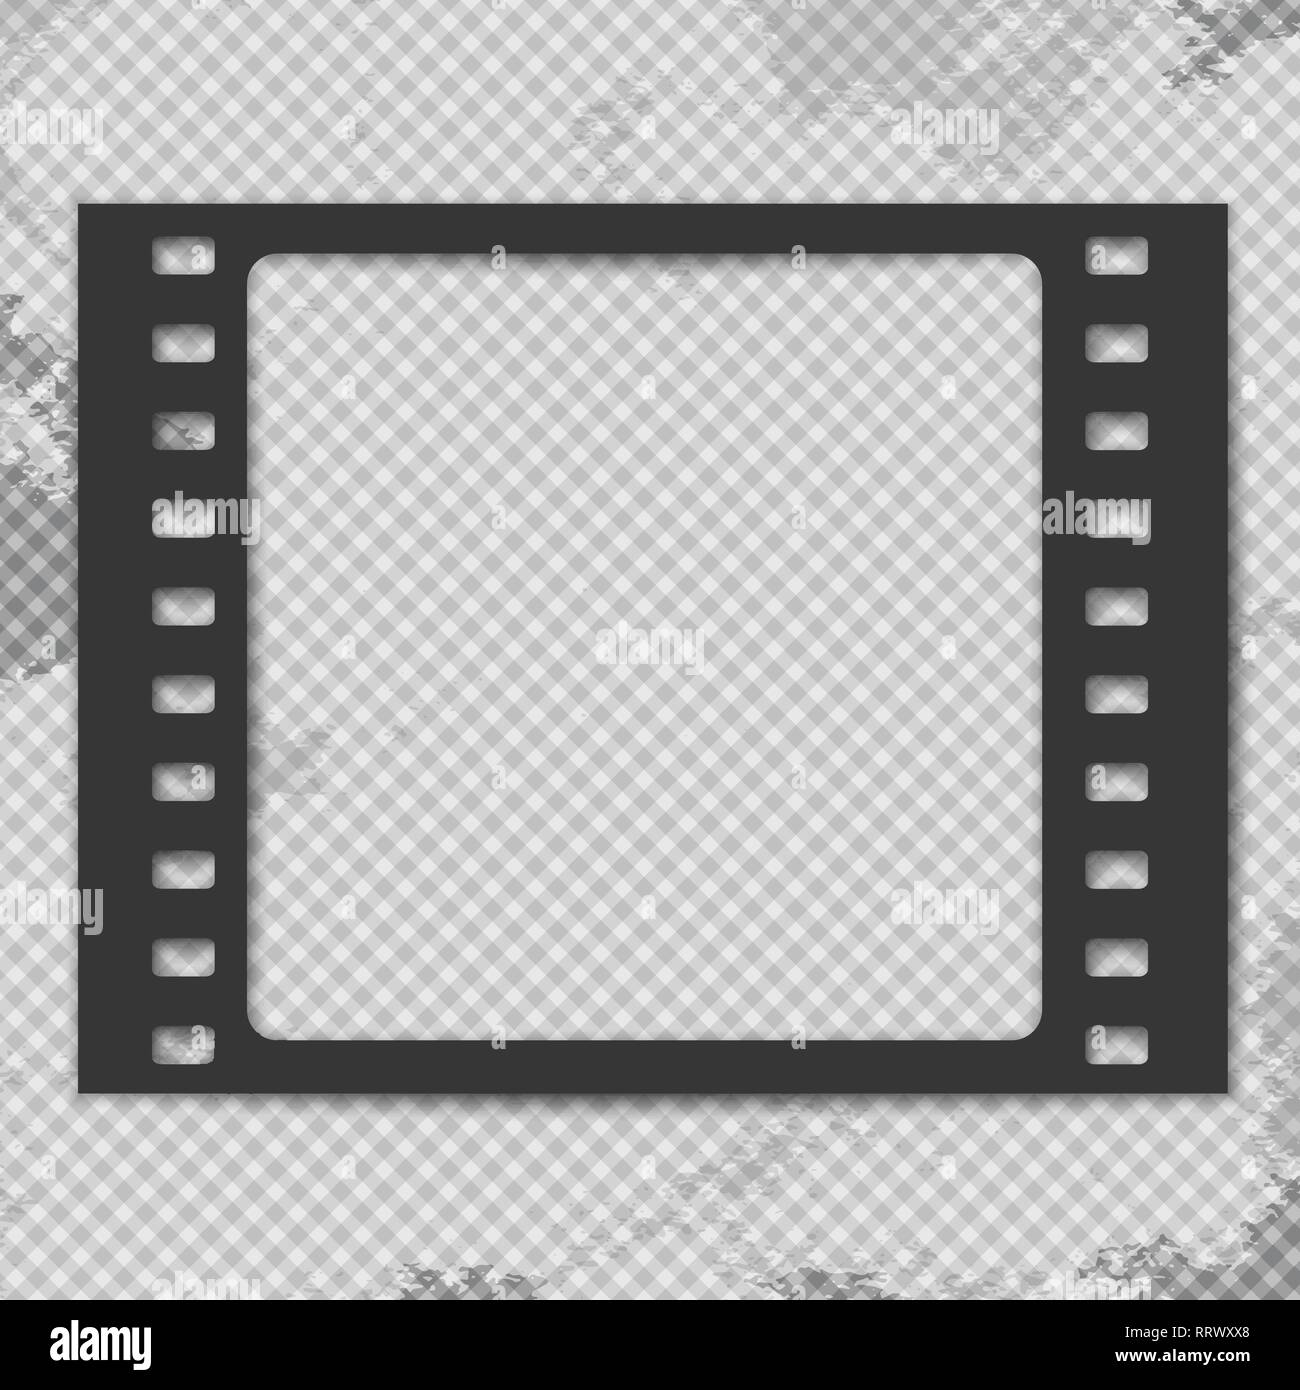 Black grunge film strip with shadow is on squared stained background. Vector illustration Stock Vector